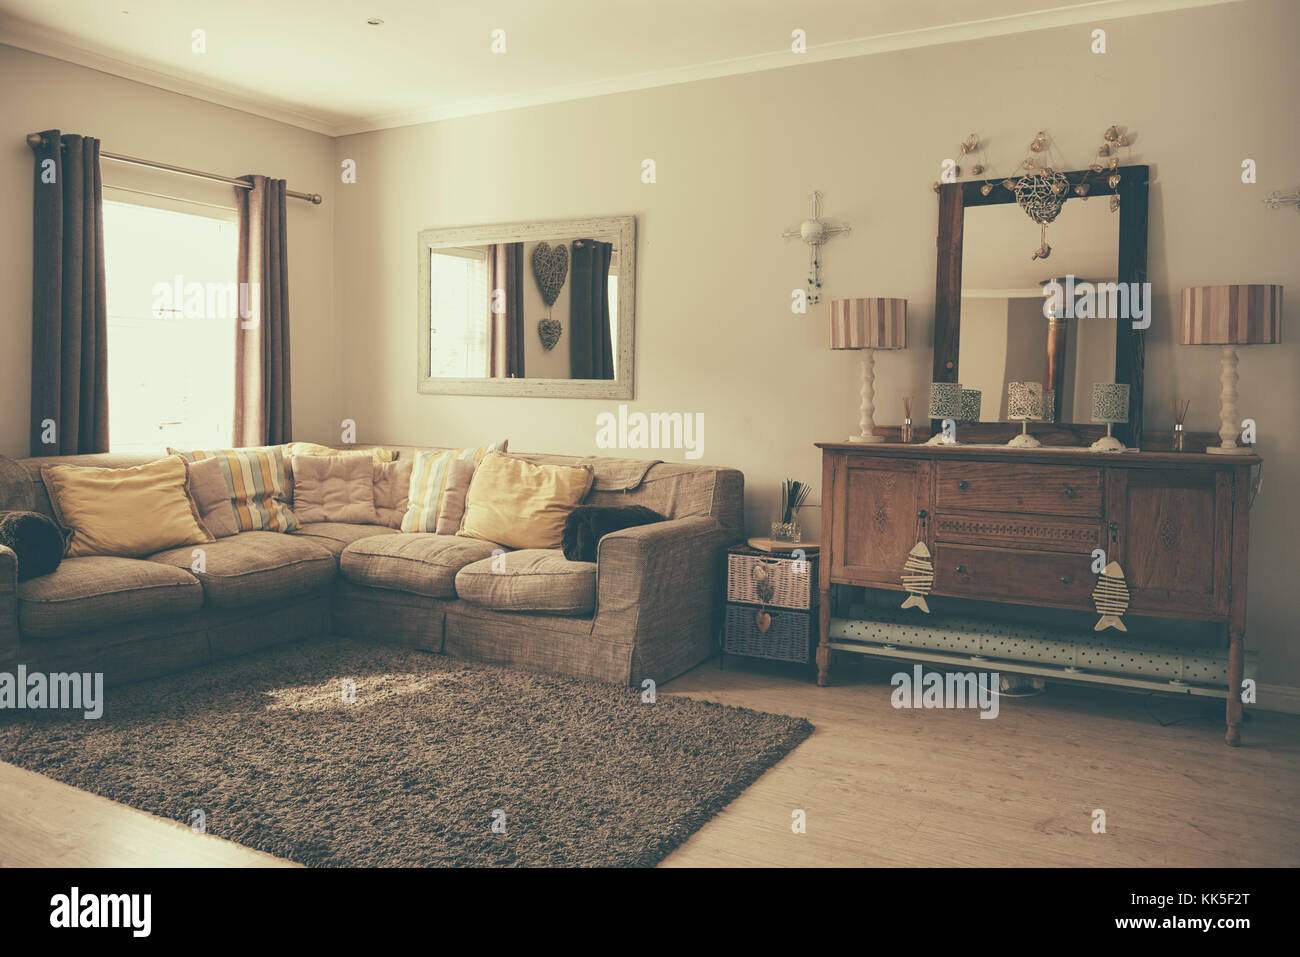 Interior of the living room of a contemporary home Stock Photo